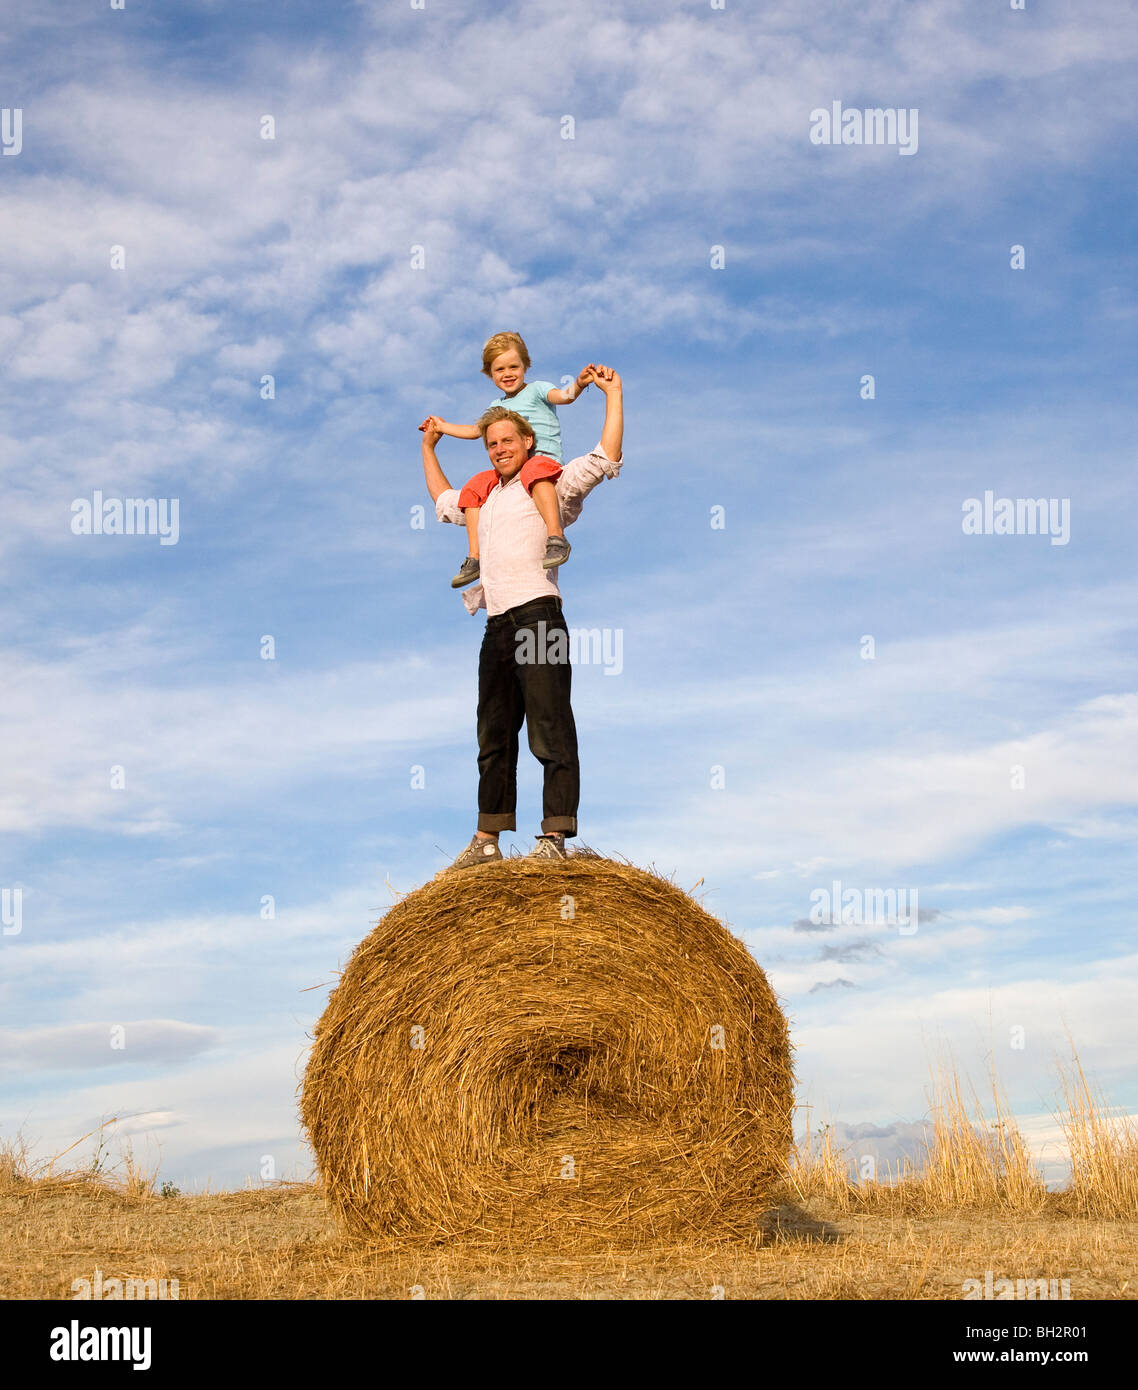 man and boy standing on hay bale Stock Photo